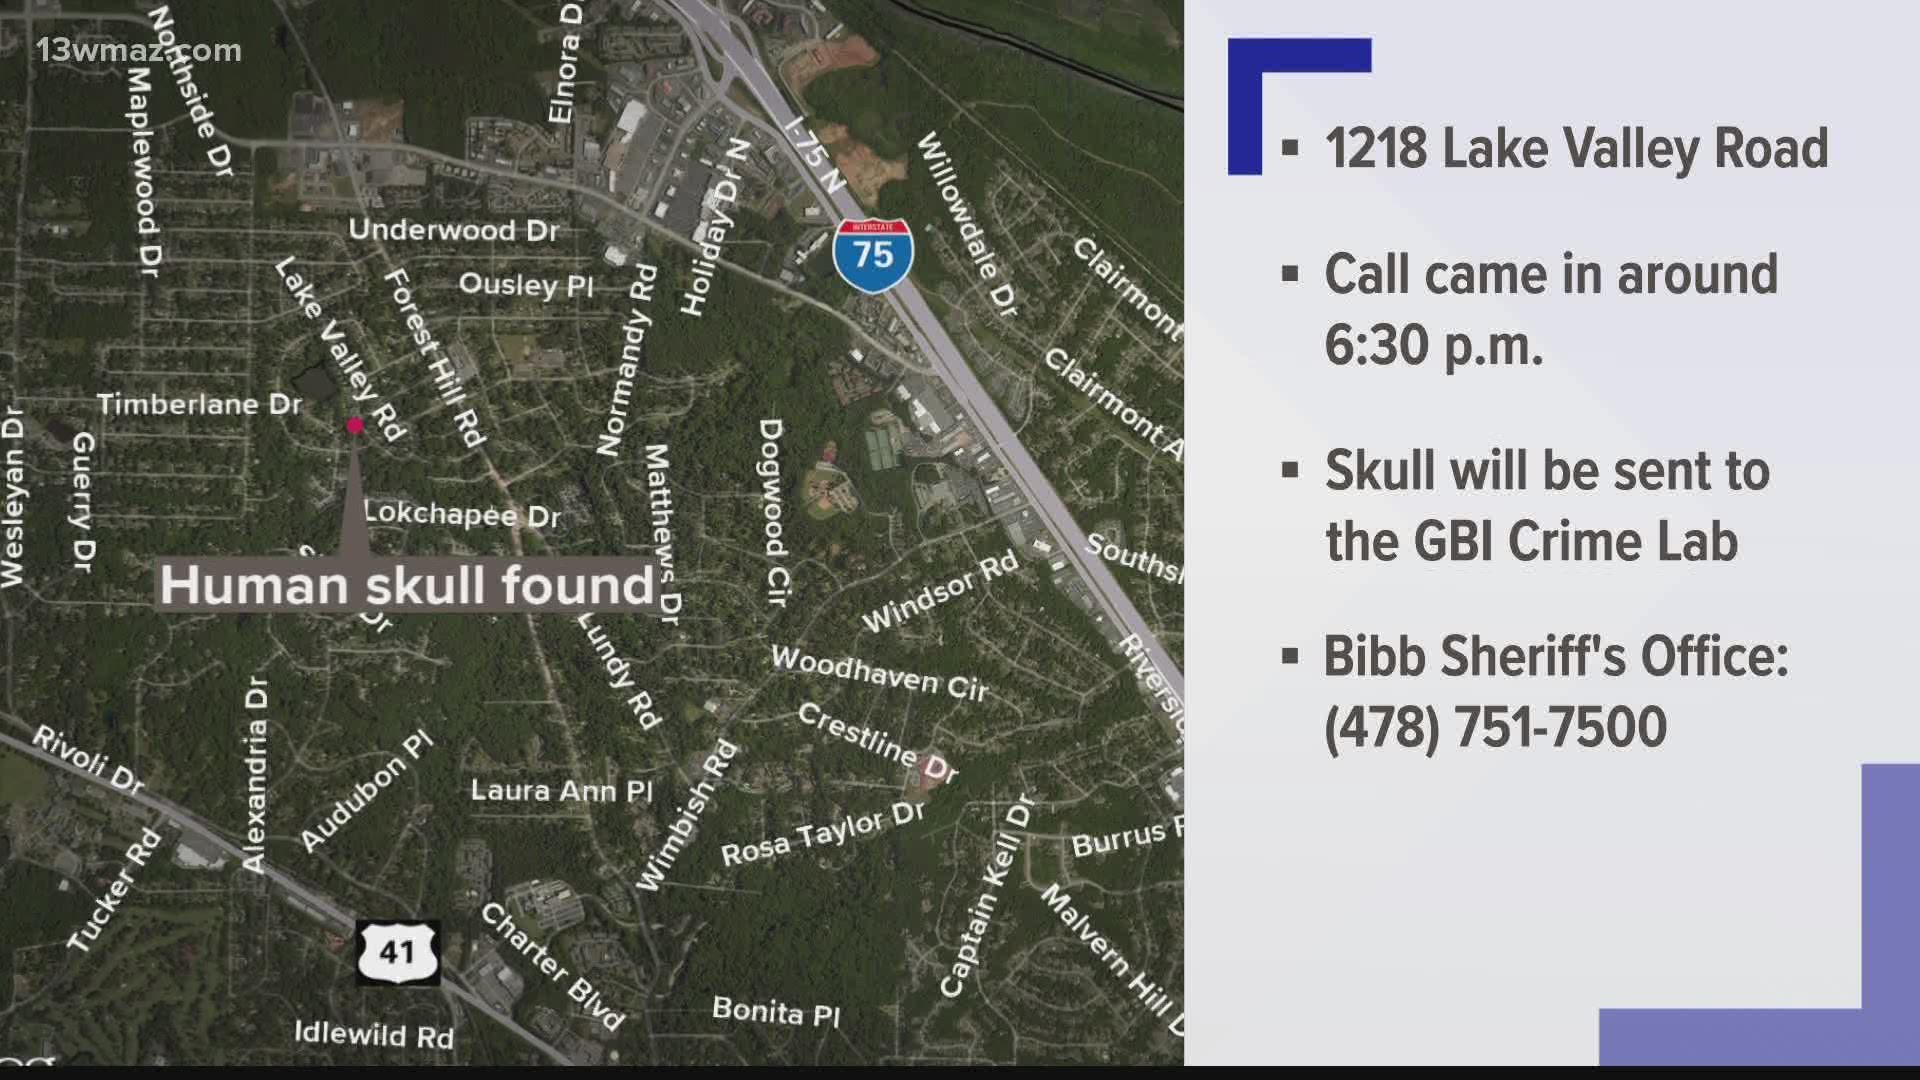 Bibb deputies are investigating after a human skull was found at 1218 Lake Valley Road